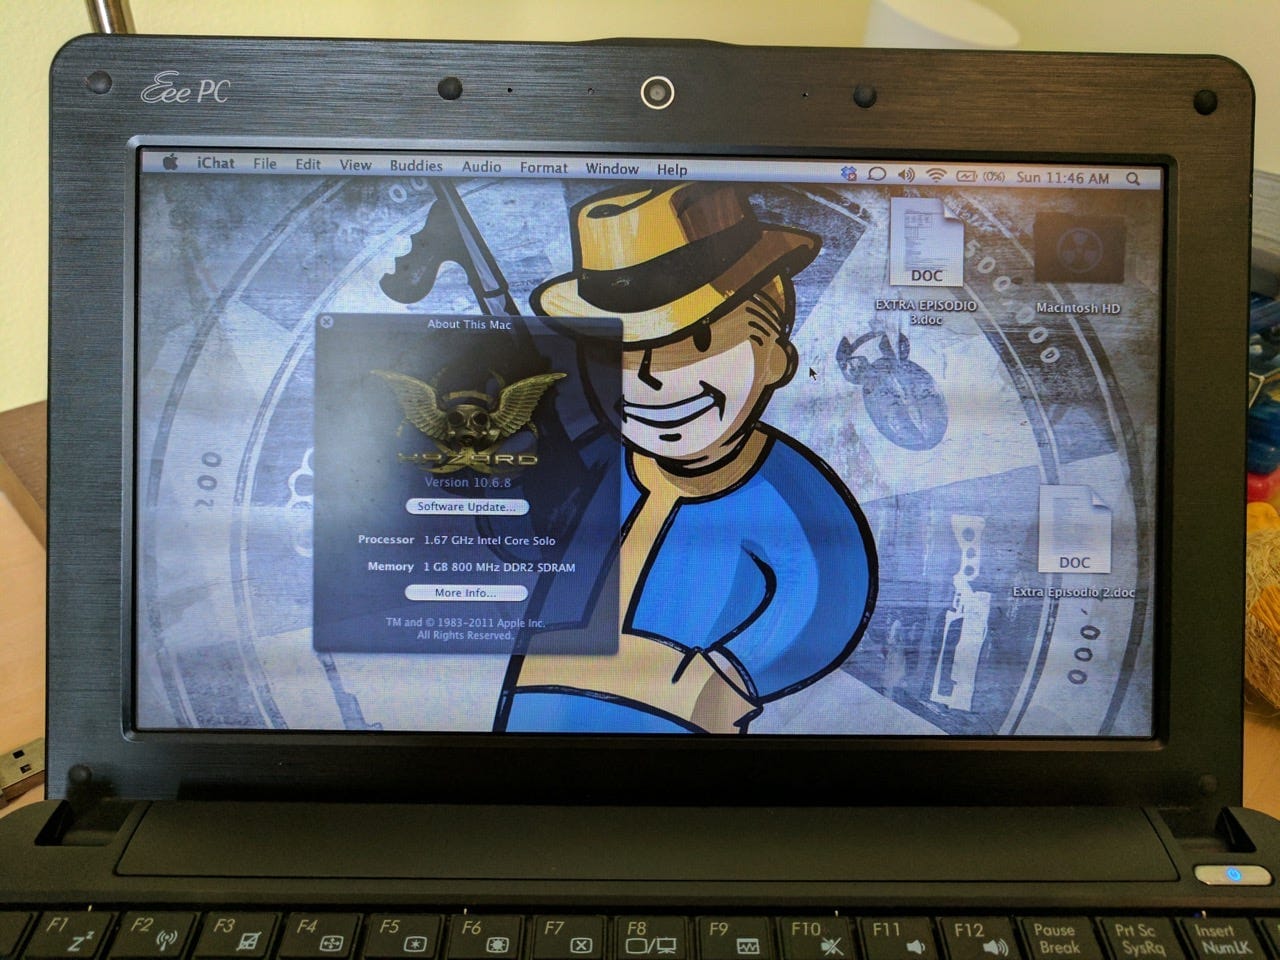 Photo of a netbook screen with a Fallout Boy wallpaper and a "About this Mac" window open, showing it is running Mac OS X 10.6.8